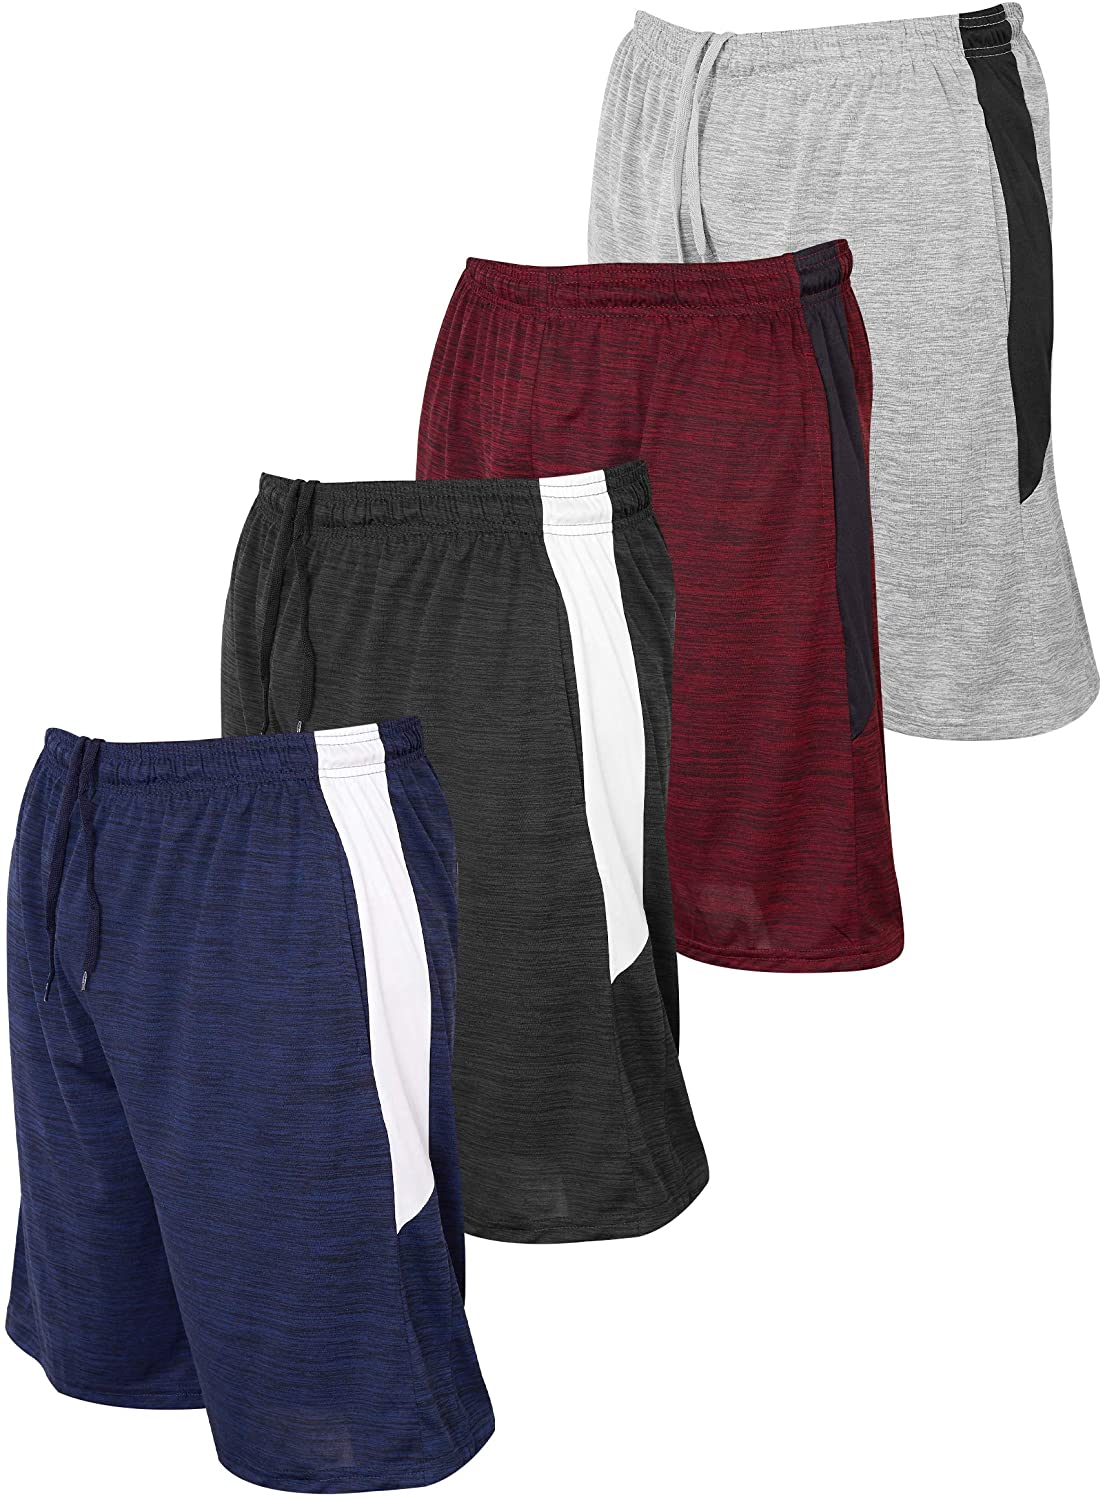 Reset Men's Athletic Shorts with Pockets Dri-Fit Color Block Mesh Gym  Shorts - 4 | eBay